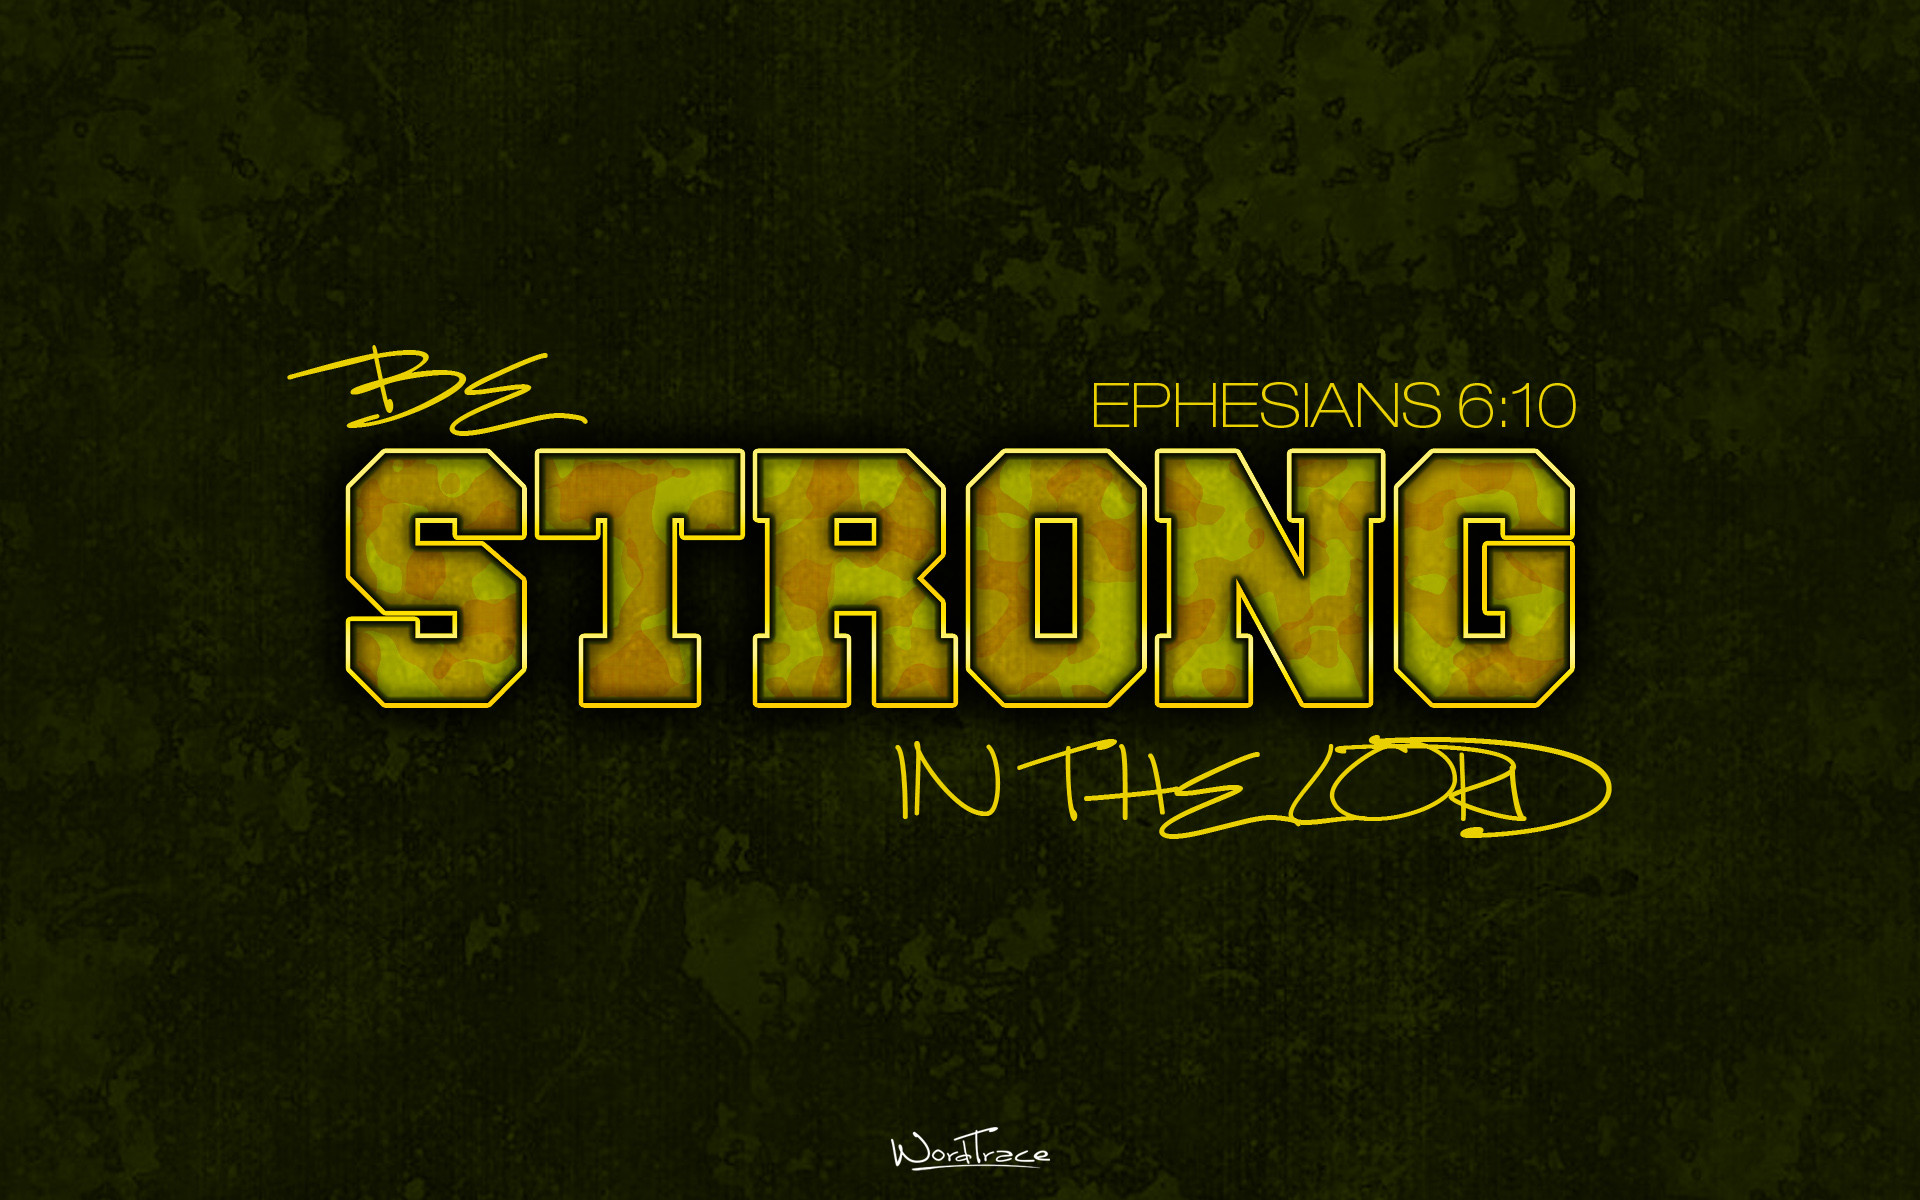 Ephesians 610 Be strong in the Lord. Wallpaper Background